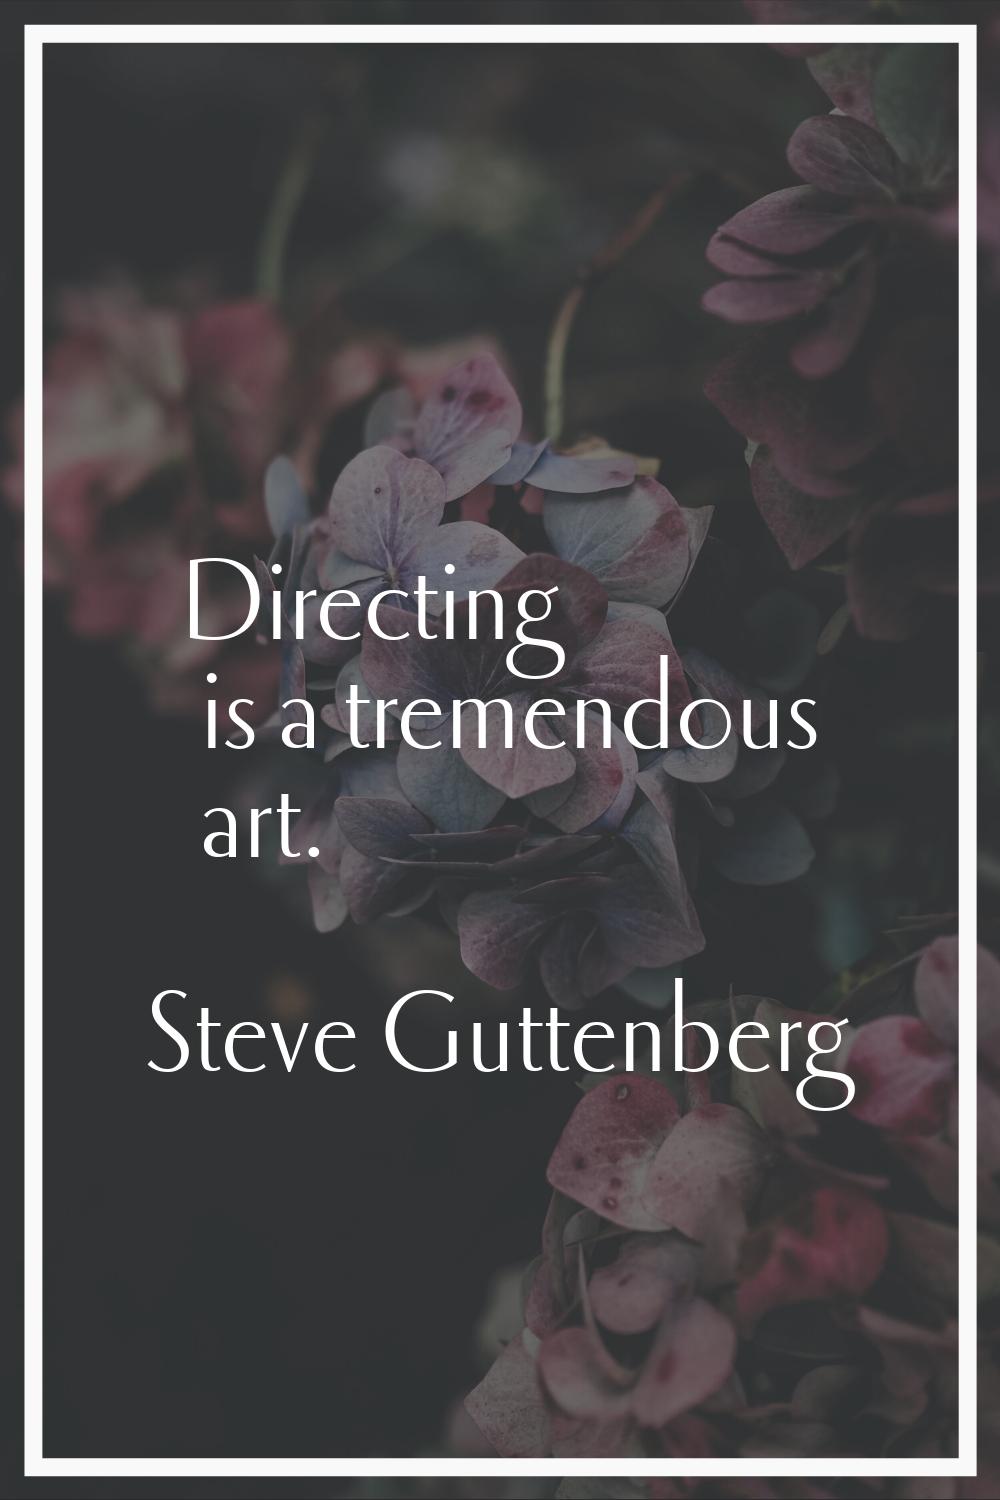 Directing is a tremendous art.